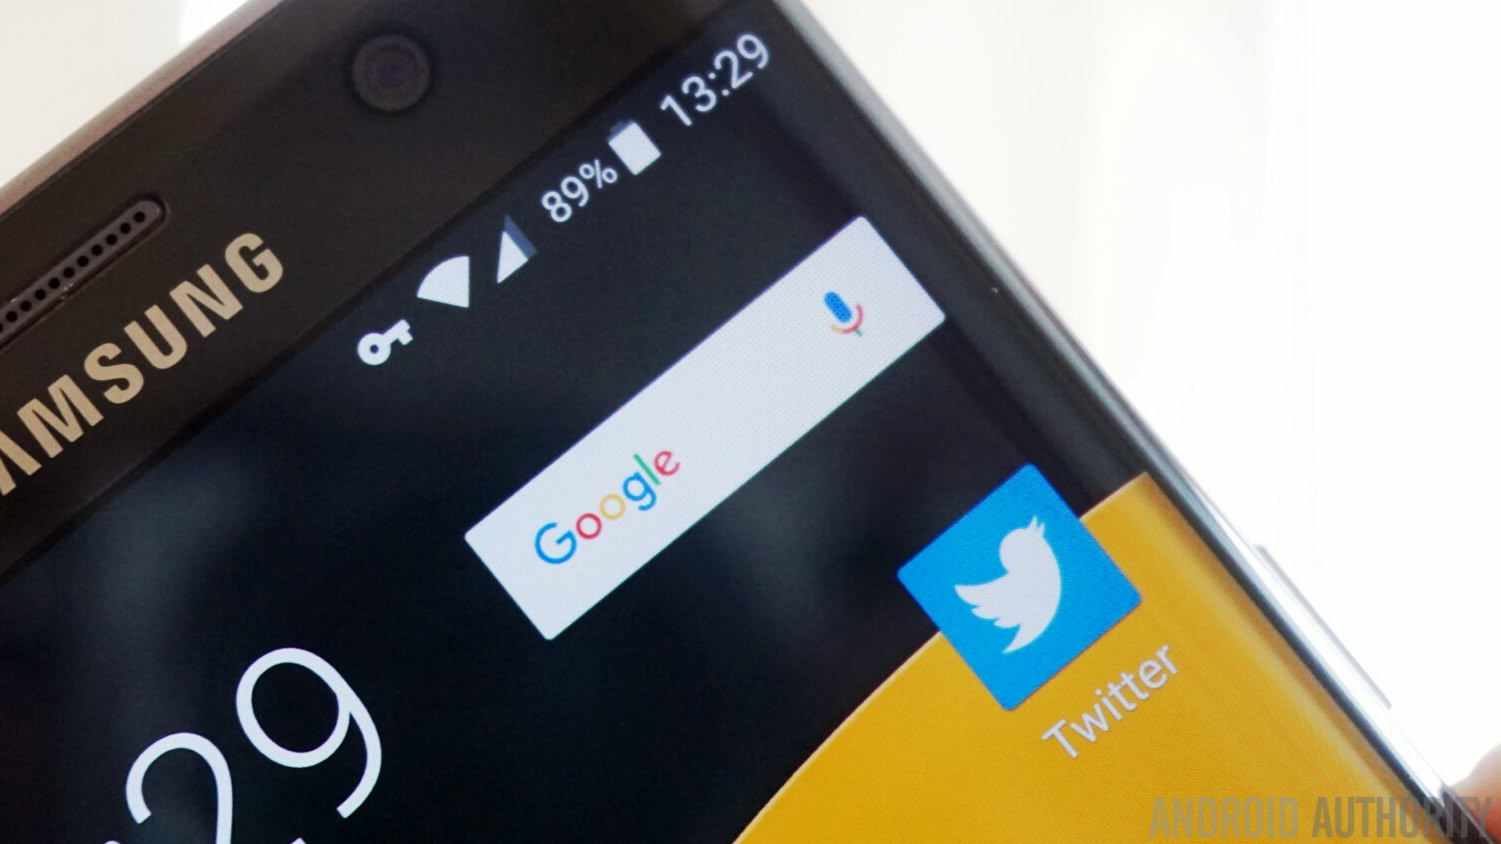 How to see sensitive content on X (Twitter) - Android Authority